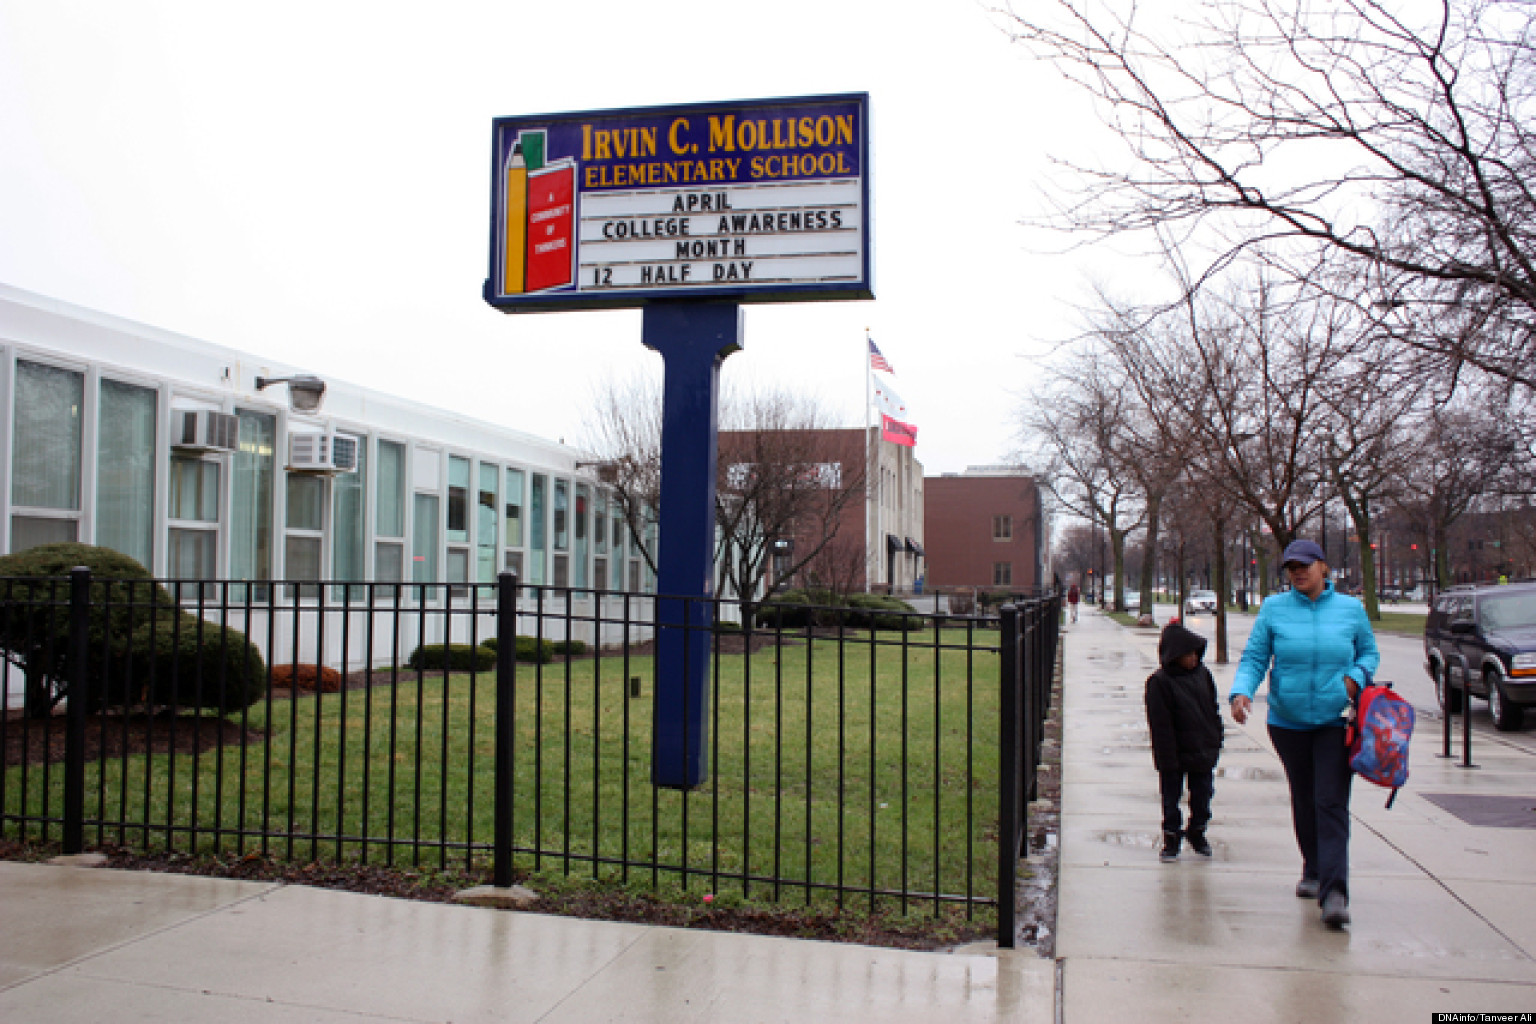 CPS School Closings Plan Would Push Some Schools Over Capacity, Data